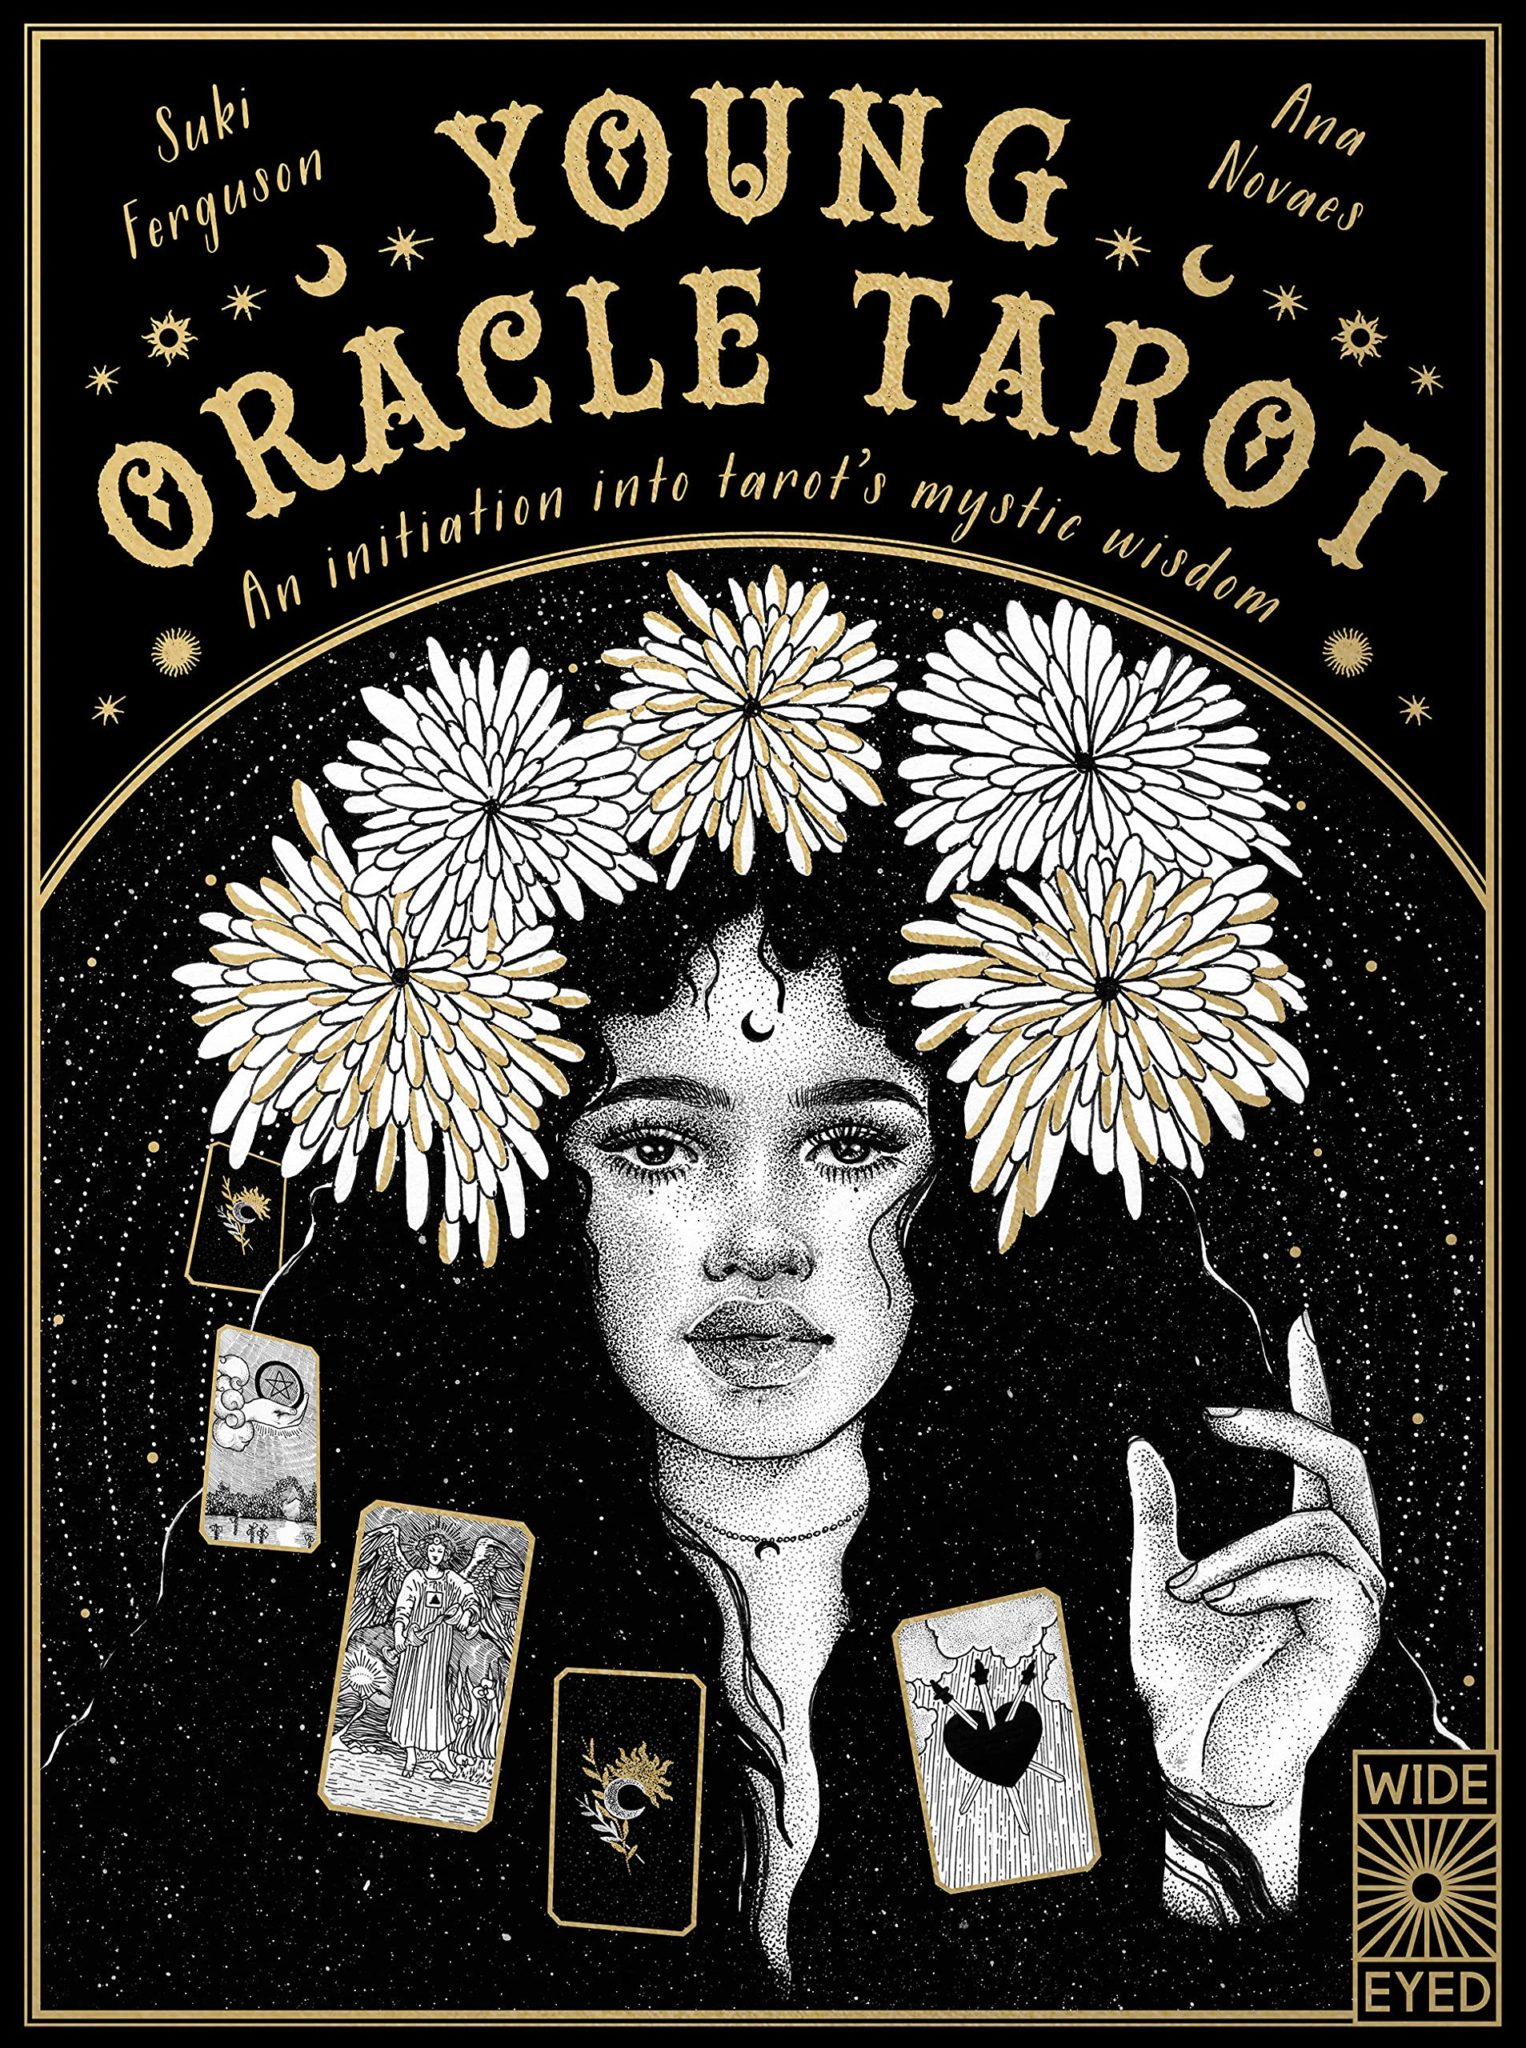 Book cover art for Young Oracle Tarot